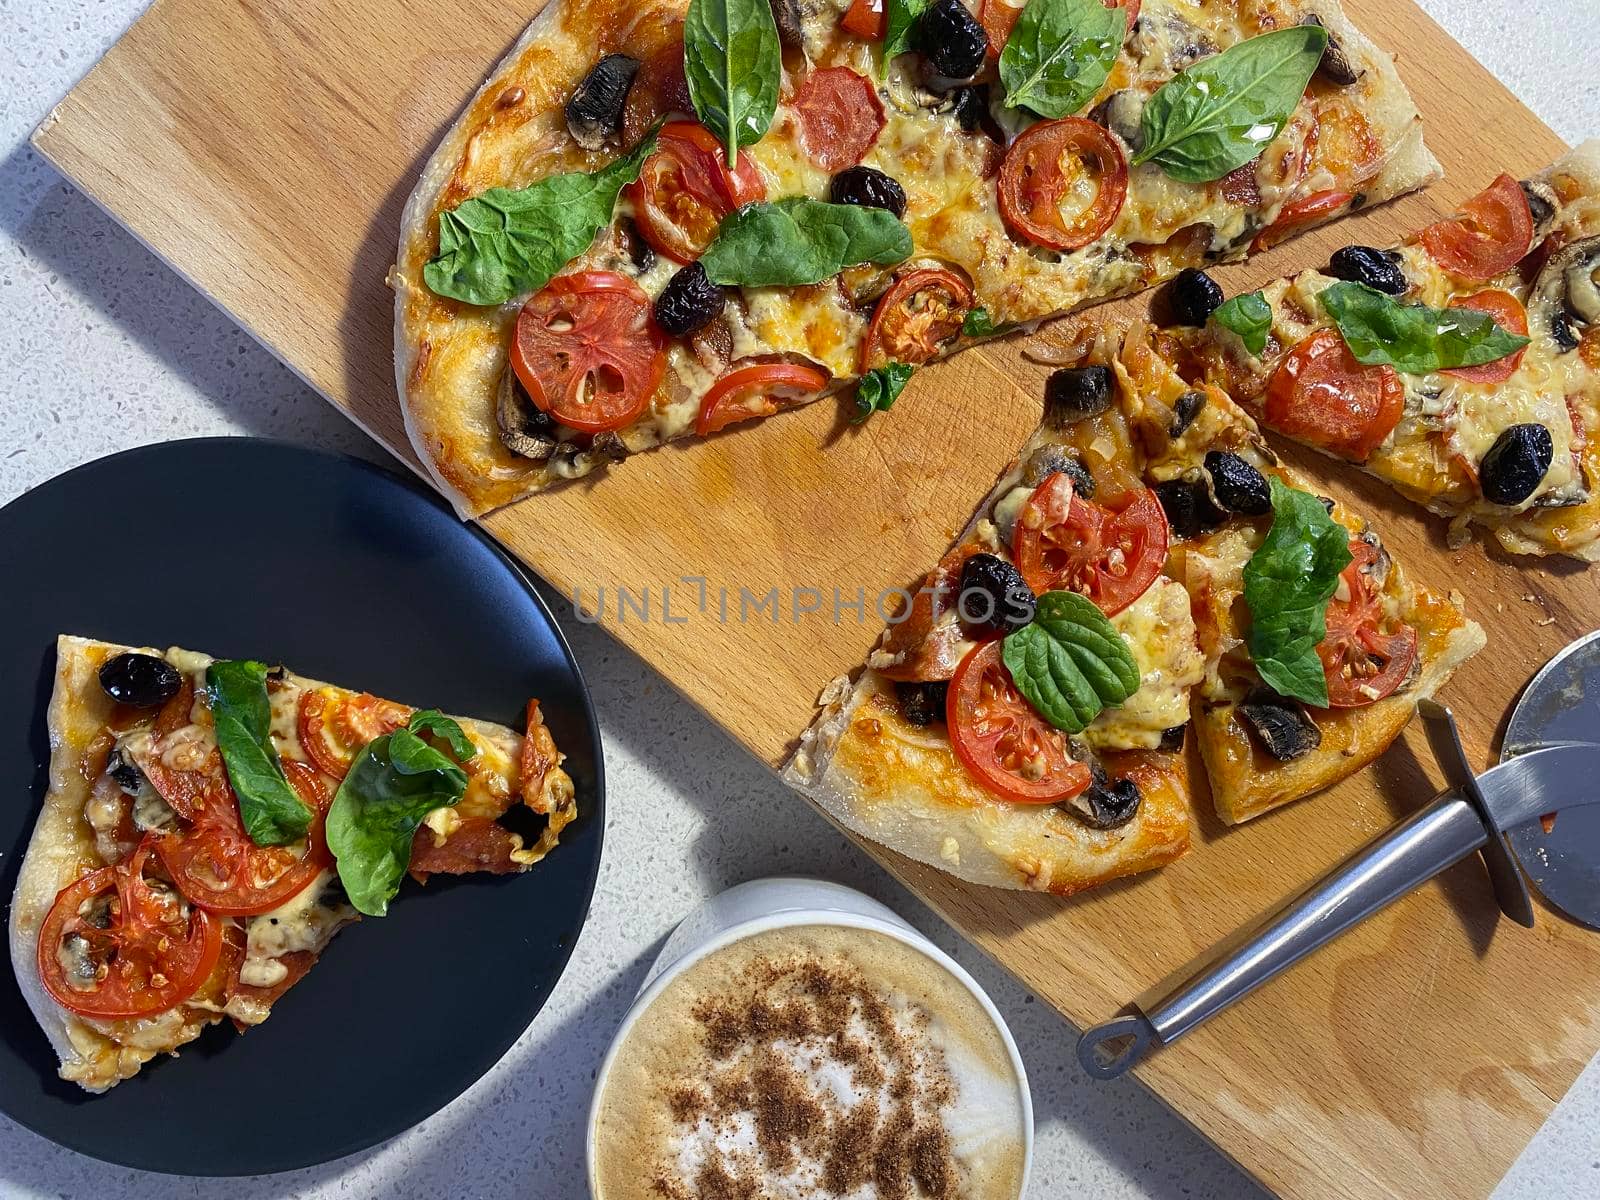 Delicious freshly baked pizza, just out of the oven on a wooden board.